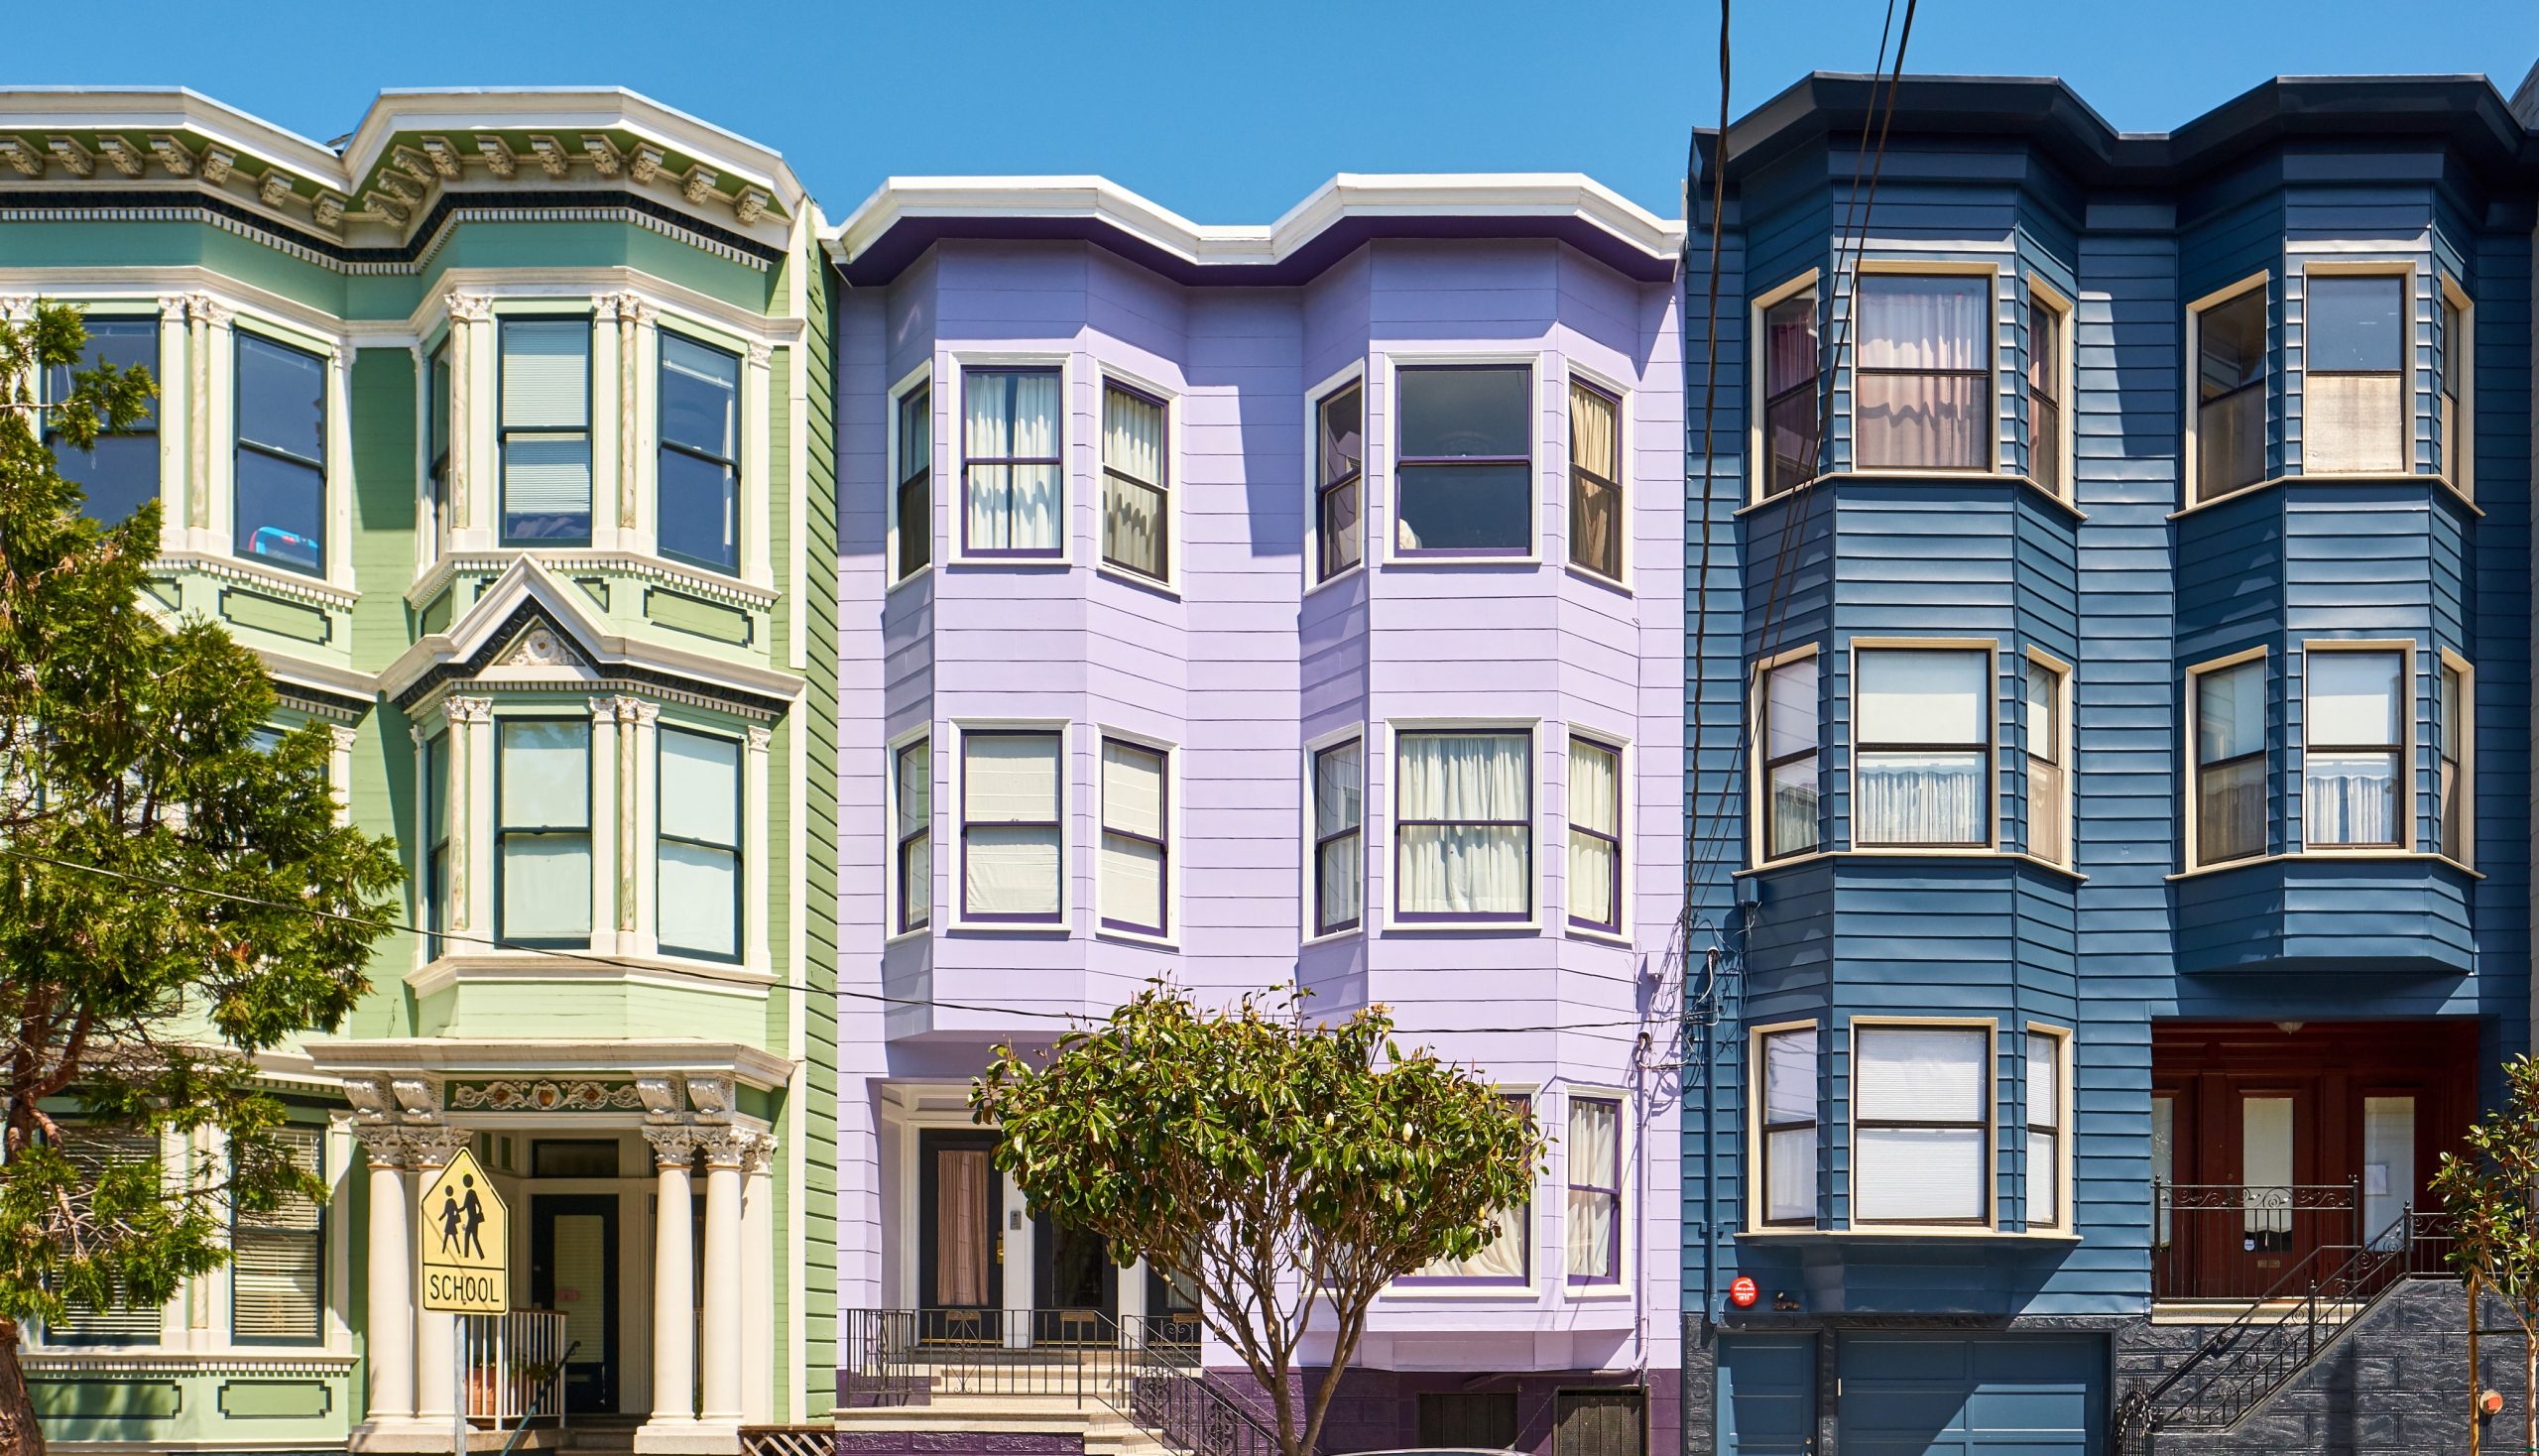 Beautiful and colorful Edwardian homes in San Francisco.